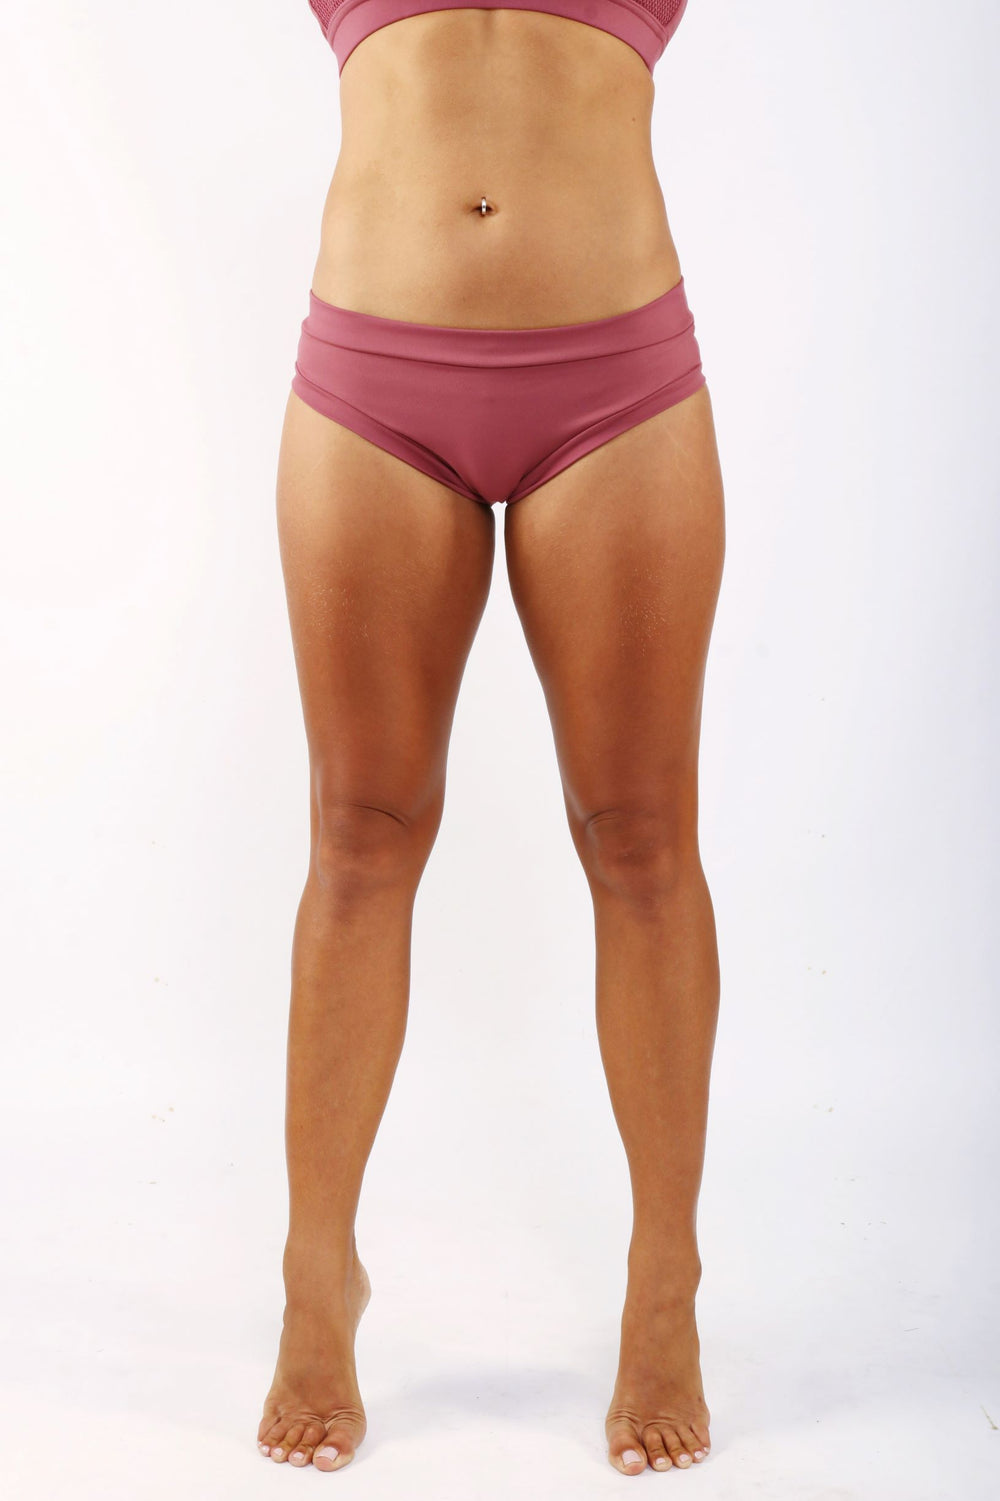 OFF THE POLE Classic Shorts - Dusty Pink *SIZE XS & M ONLY*